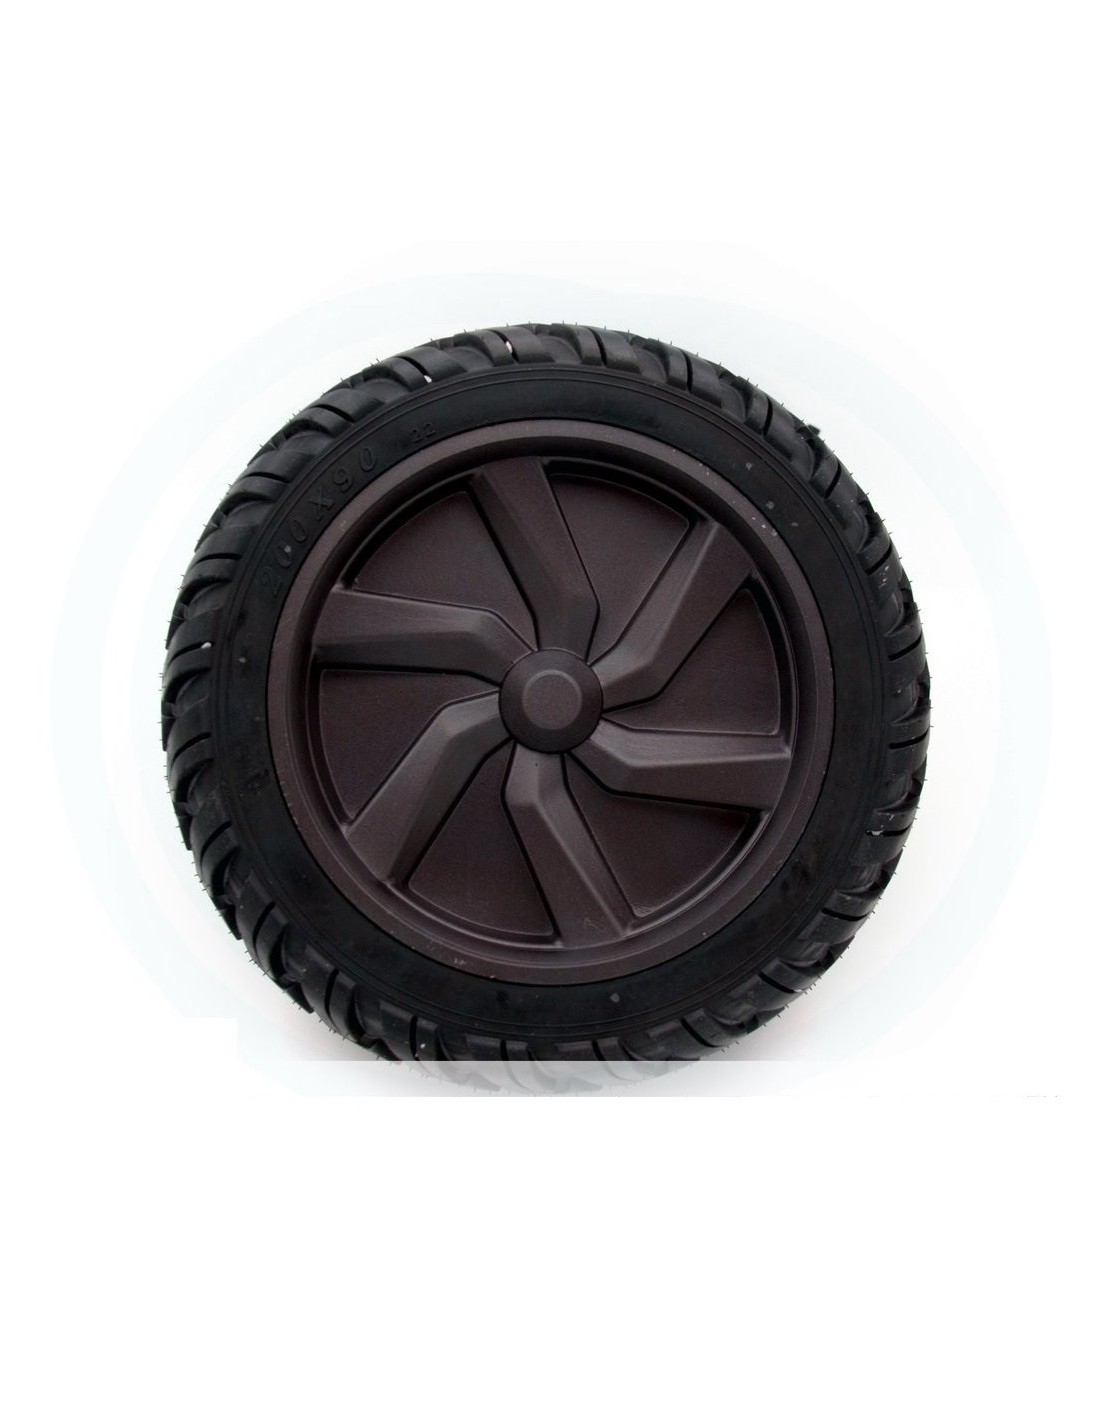 Roue pour Hummer hoverboard 8, pouces